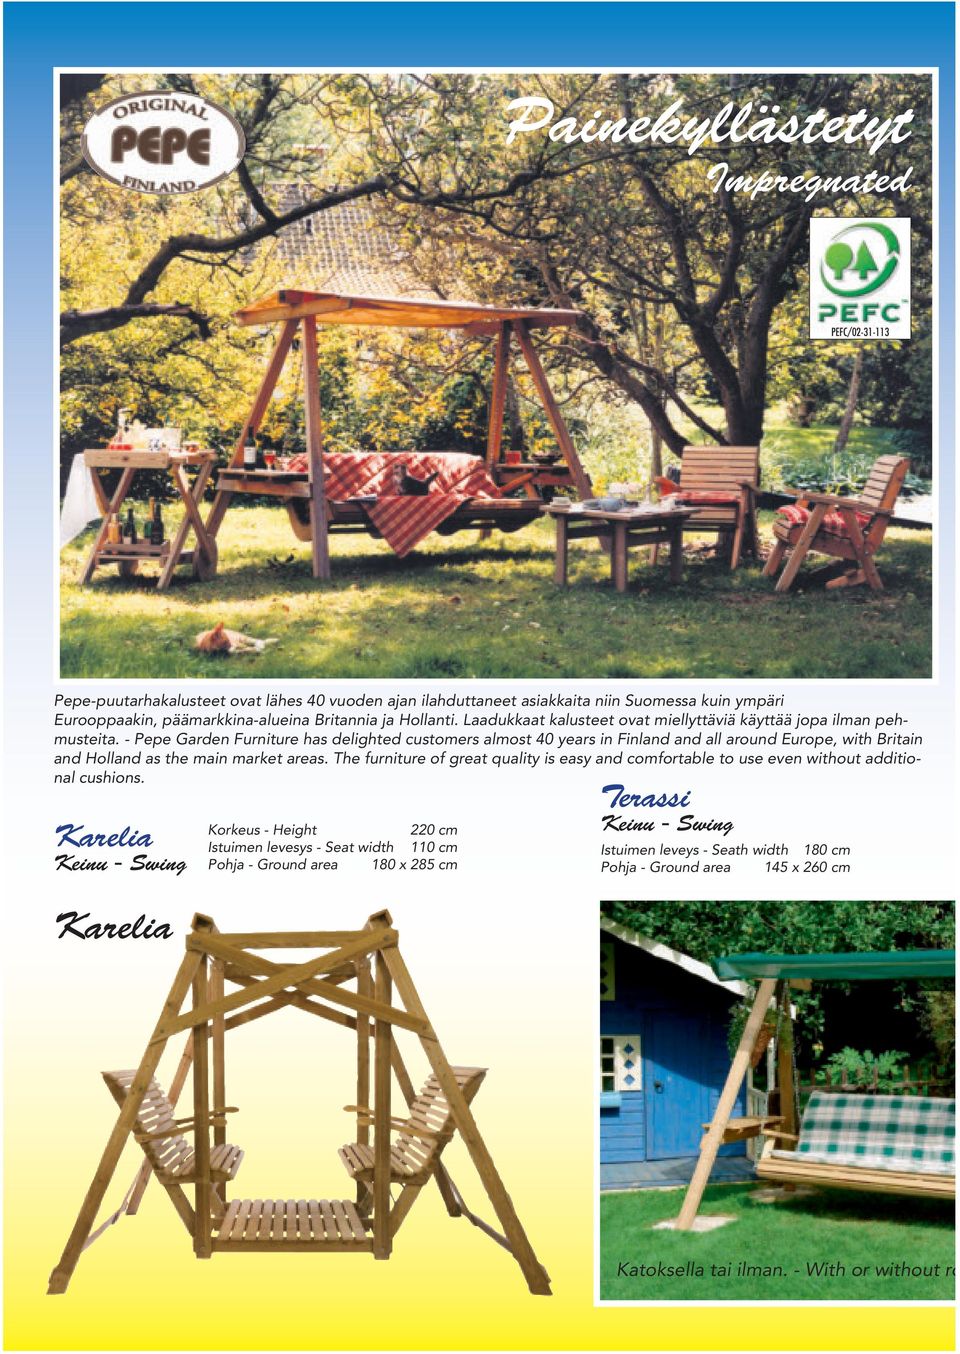 - Pepe Garden Furniture has delighted customers almost 40 years in Finland and all around Europe, with Britain and Holland as the main market areas.